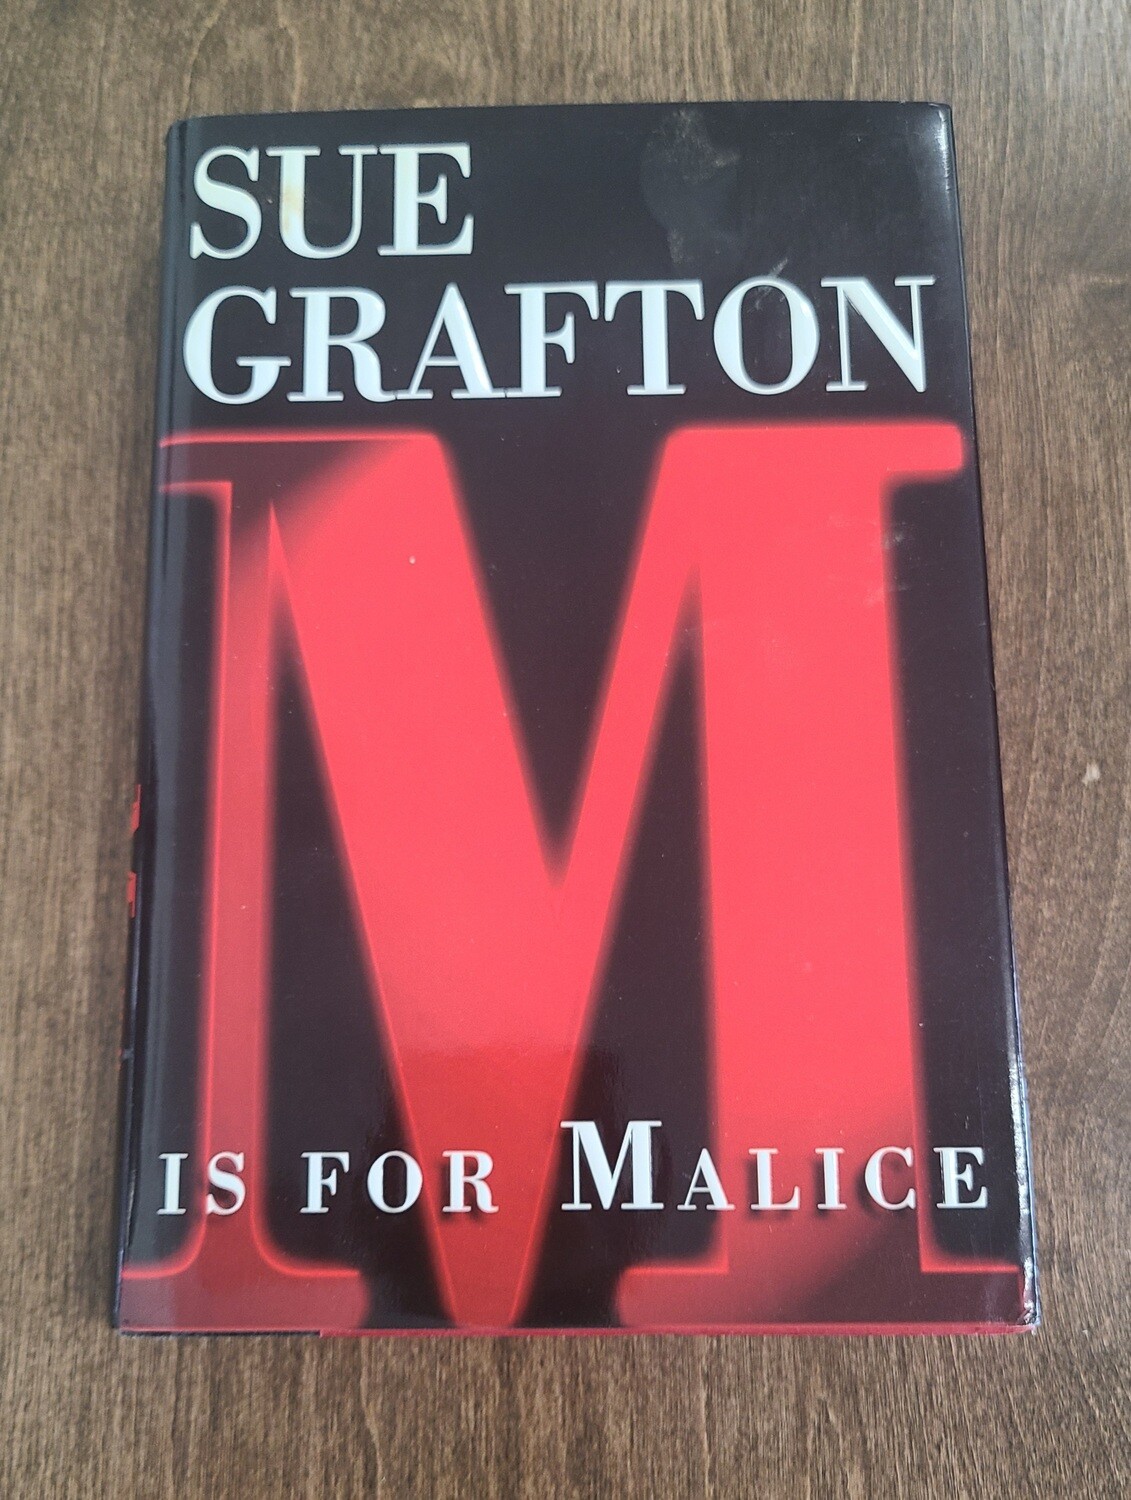 M is for Malice by Sue Grafton